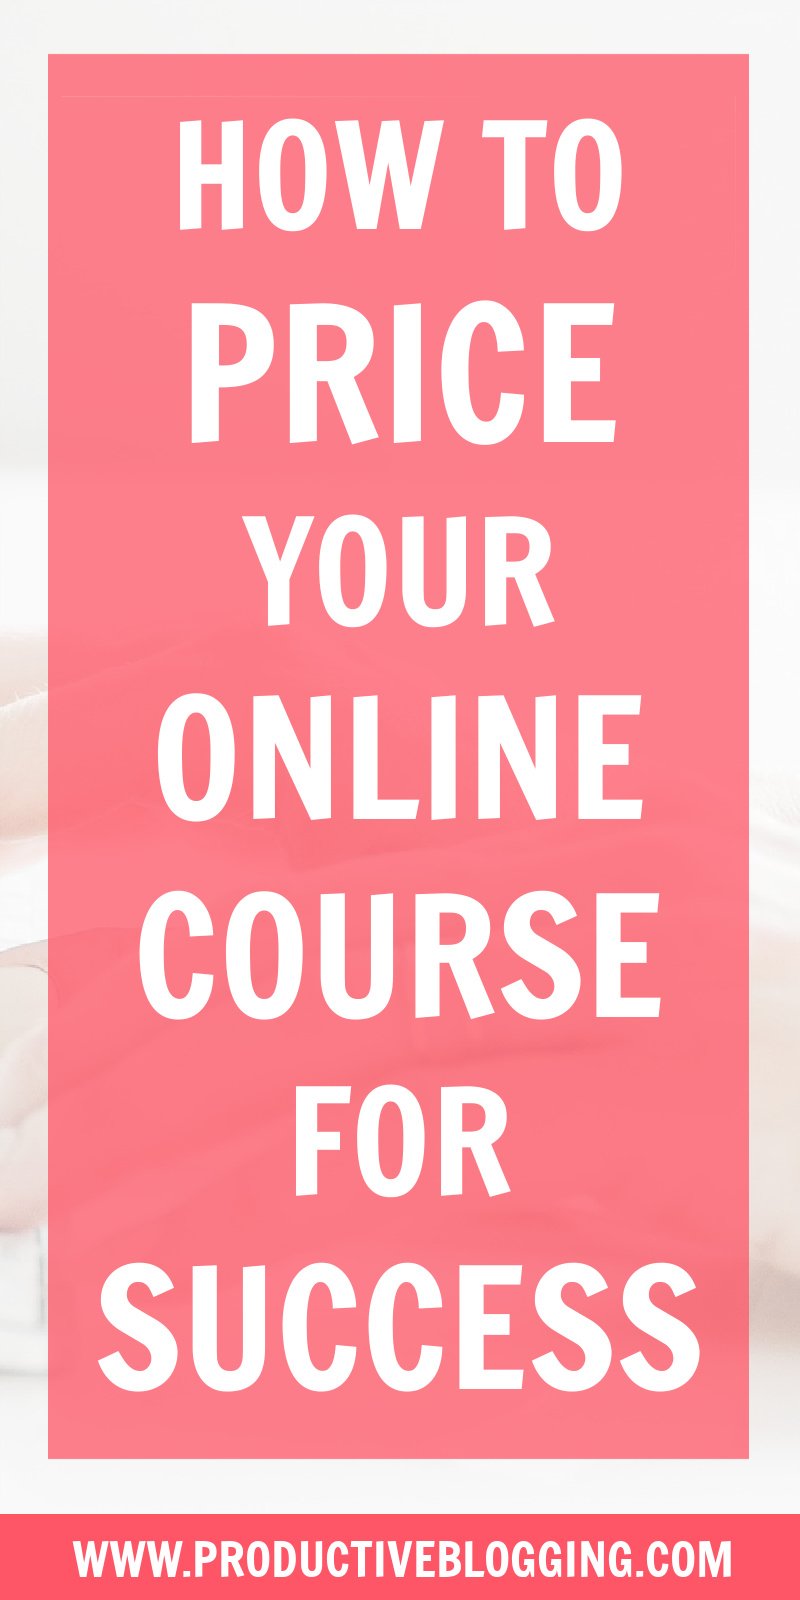 So, you’ve created an online course, it’s nearly time to launch… But how much should you charge for it? Find out in this guide to pricing an online course for success! #onlinecoursepricing #digitalcoursepricing #onlinecourse #digitalcourse #onlinecoursecreation #digitalcoursecreation #onlinecourselaunch #digitalcourselaunch #makemoneyblogging #monetizeyourblog #passiveincomeblogging #professionalblogger #bloggingismyjob #solopreneur #mompreneur #bloggingbiz #bloggingtips #productiveblogging